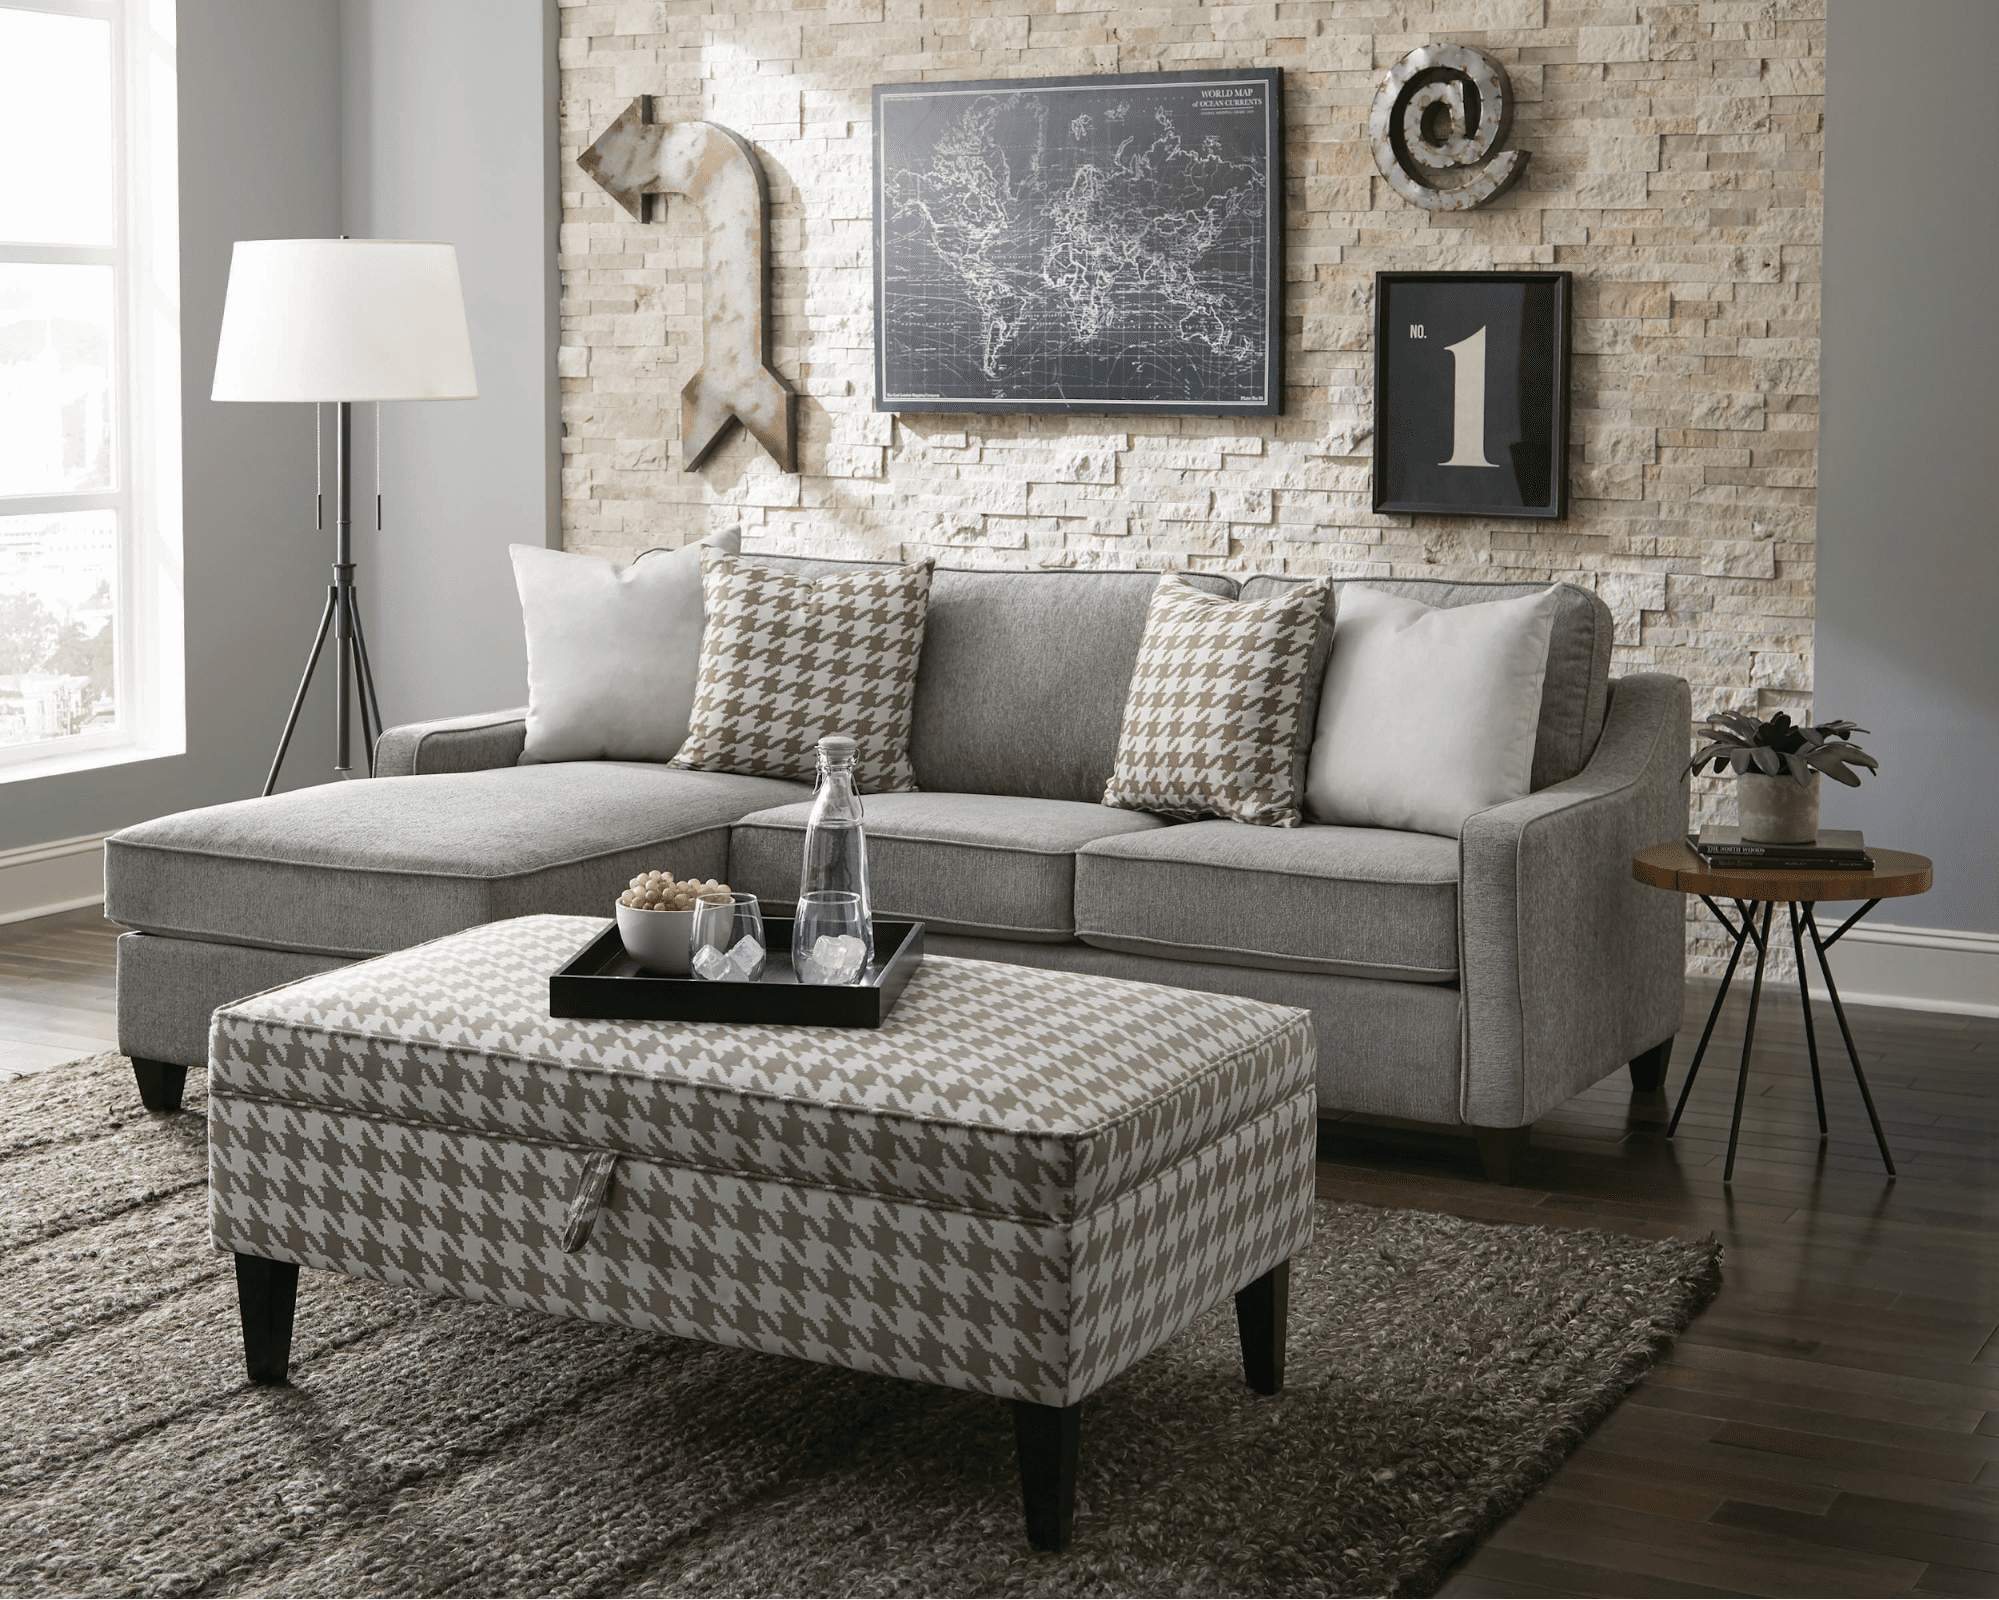 How To Pick A Small Sectional Sofa For A Small Space – Coast Throughout Sofas For Compact Living (View 10 of 15)